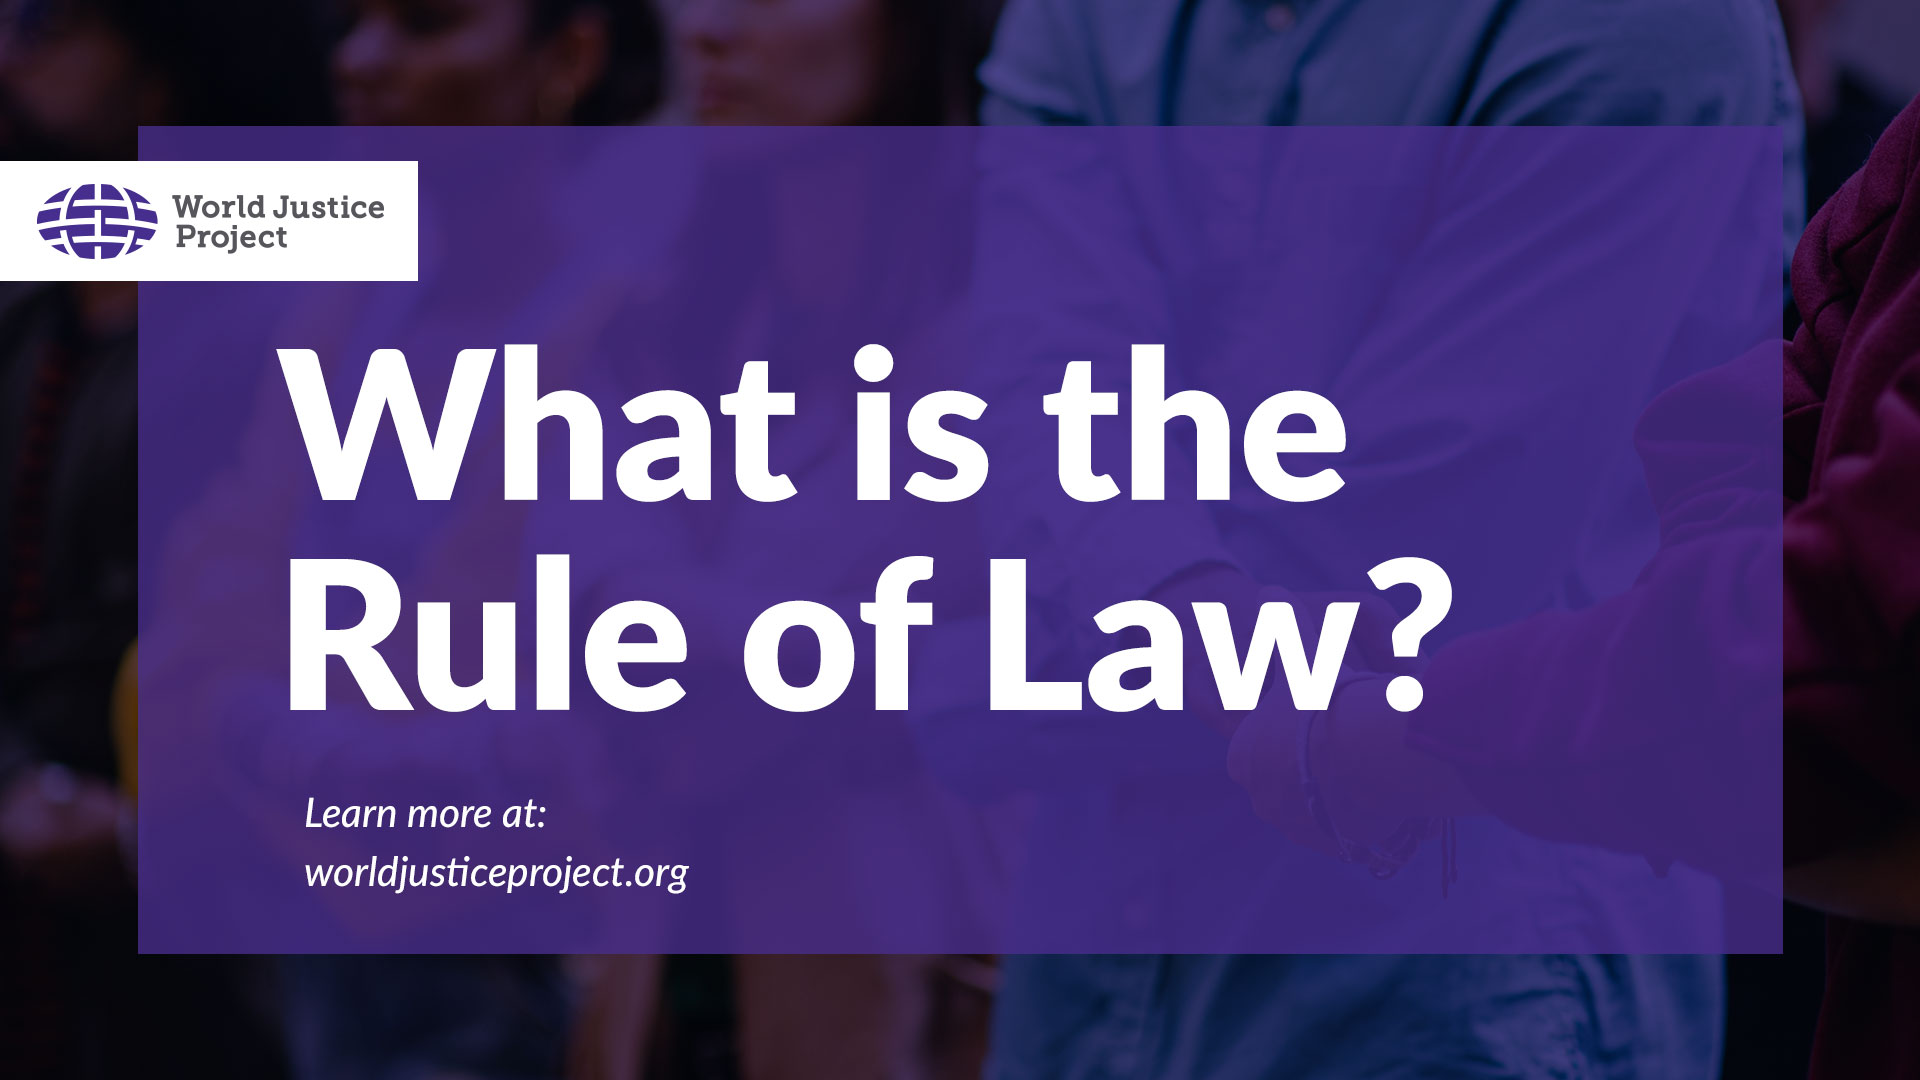 rule of law definition